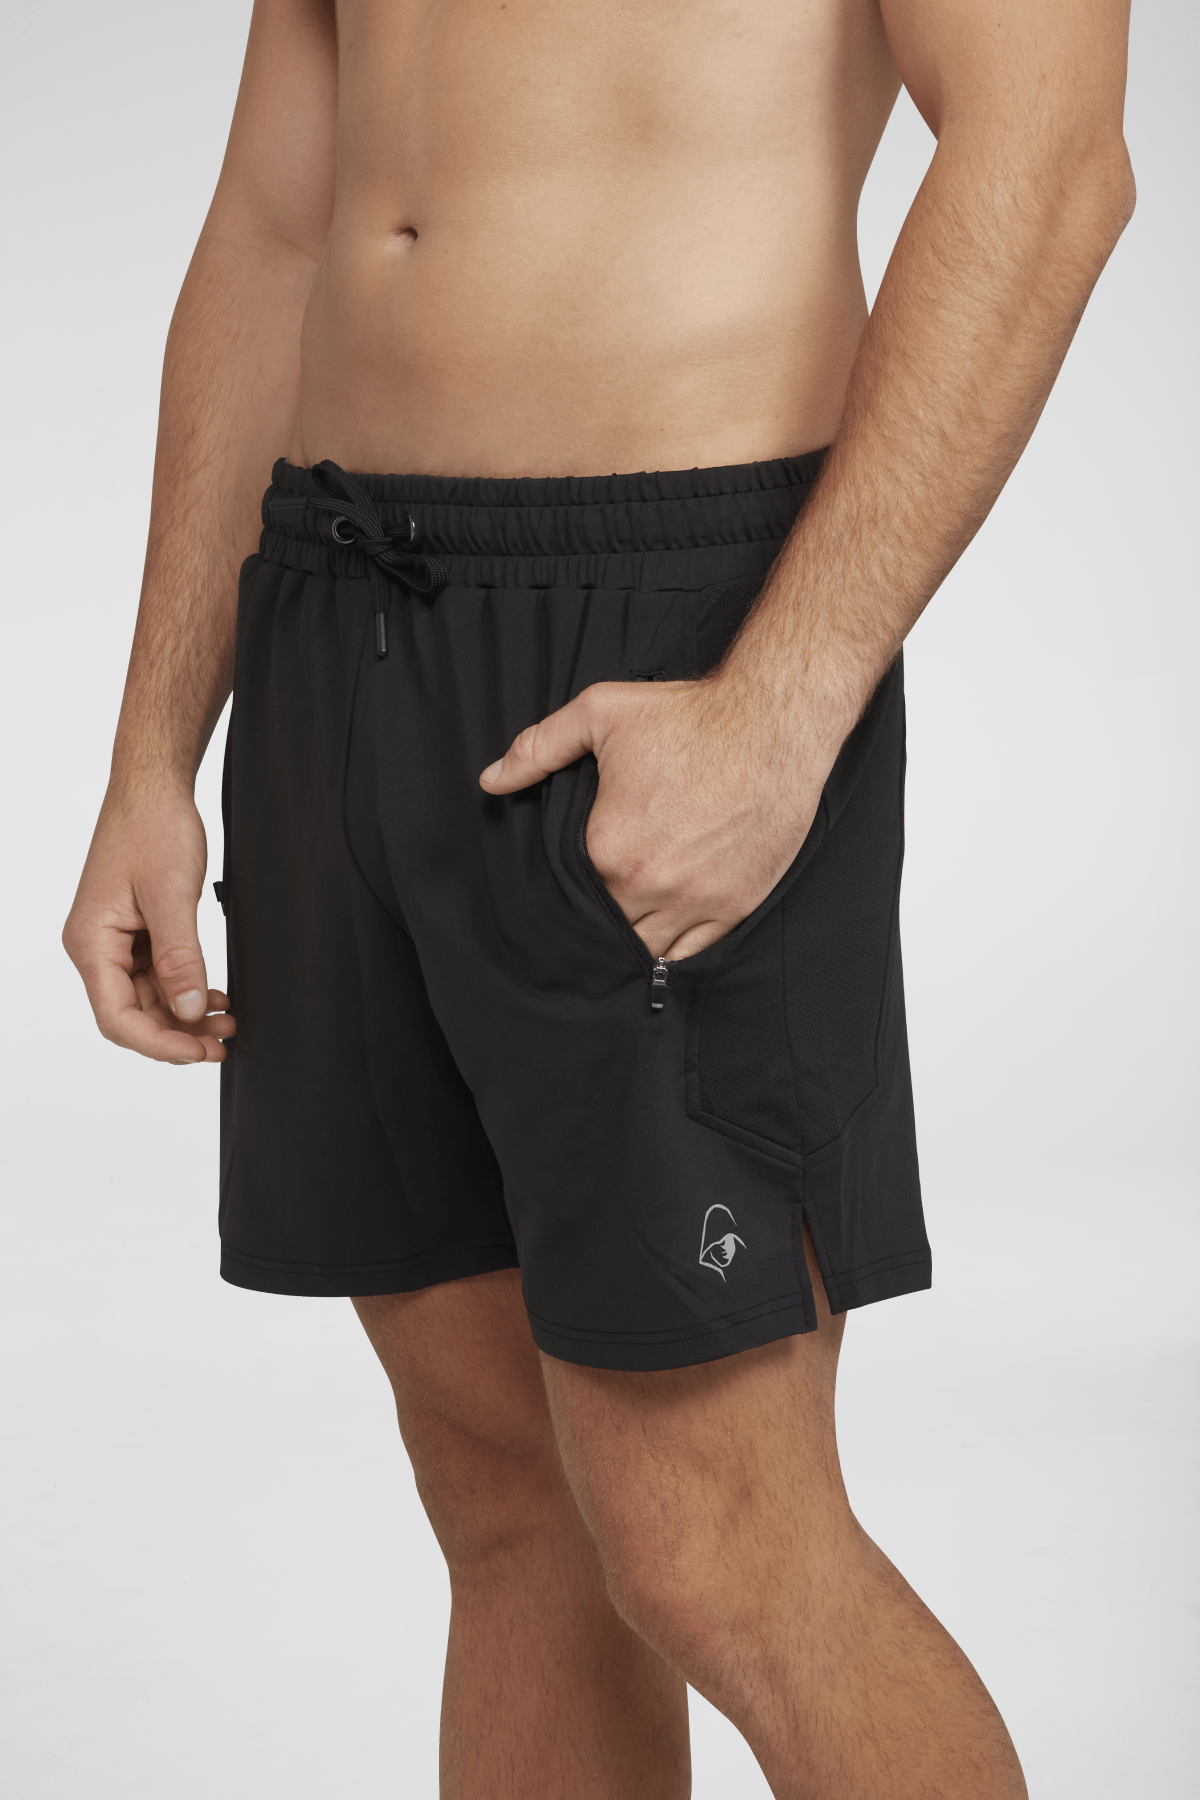 Newtype Official Shorts Intricate Shorts - Black